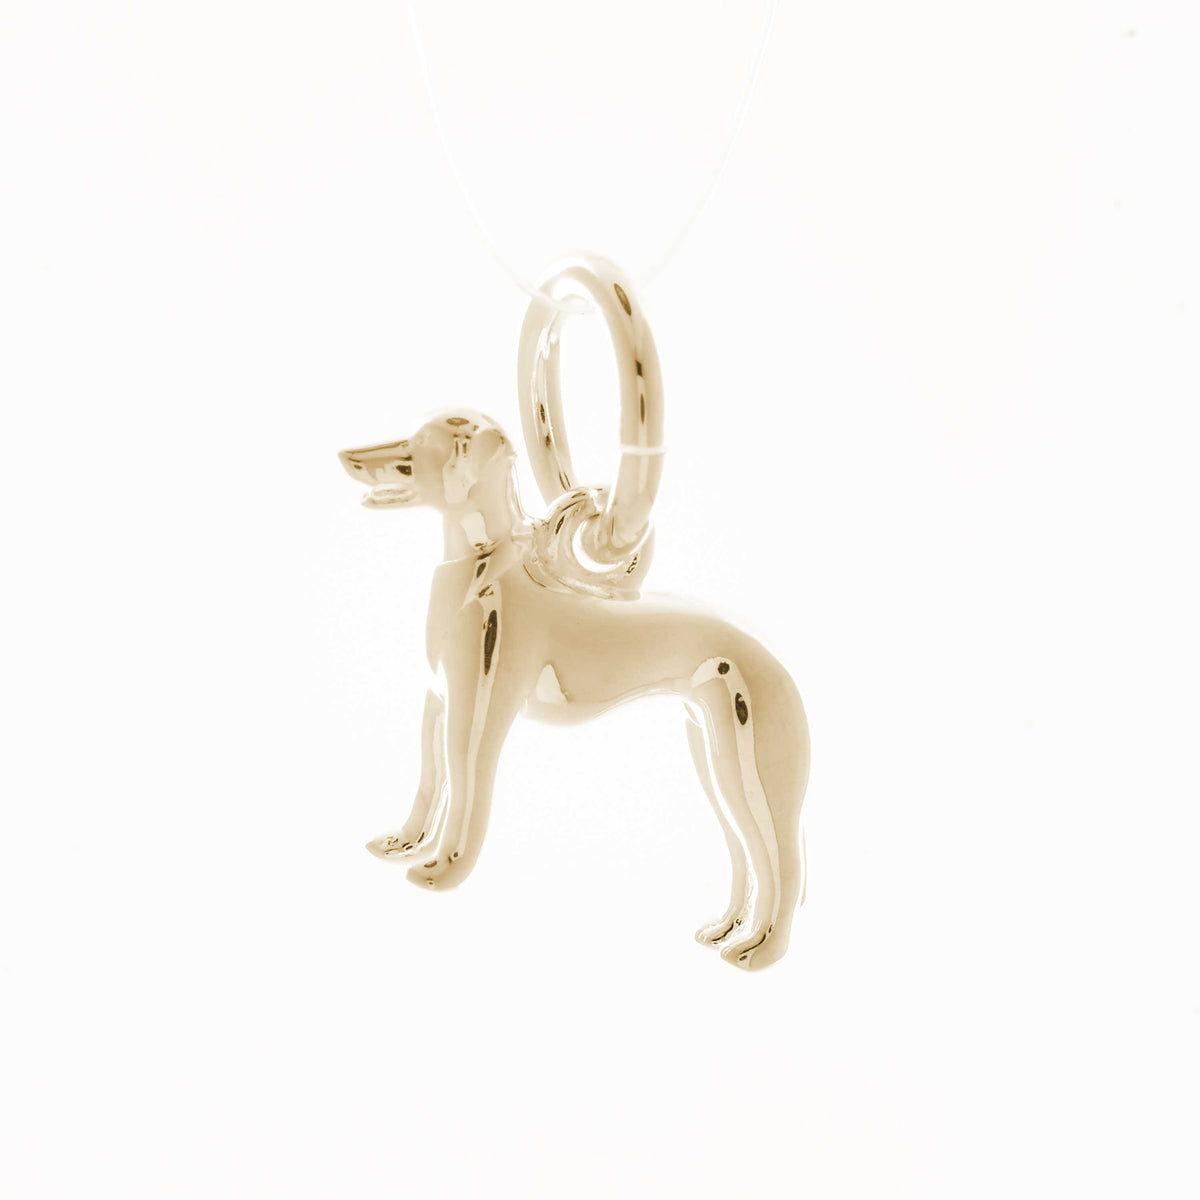 Solid 9ct gold Whippet charm with tiny bandana (optional), perfect for a charm bracelet or necklace.